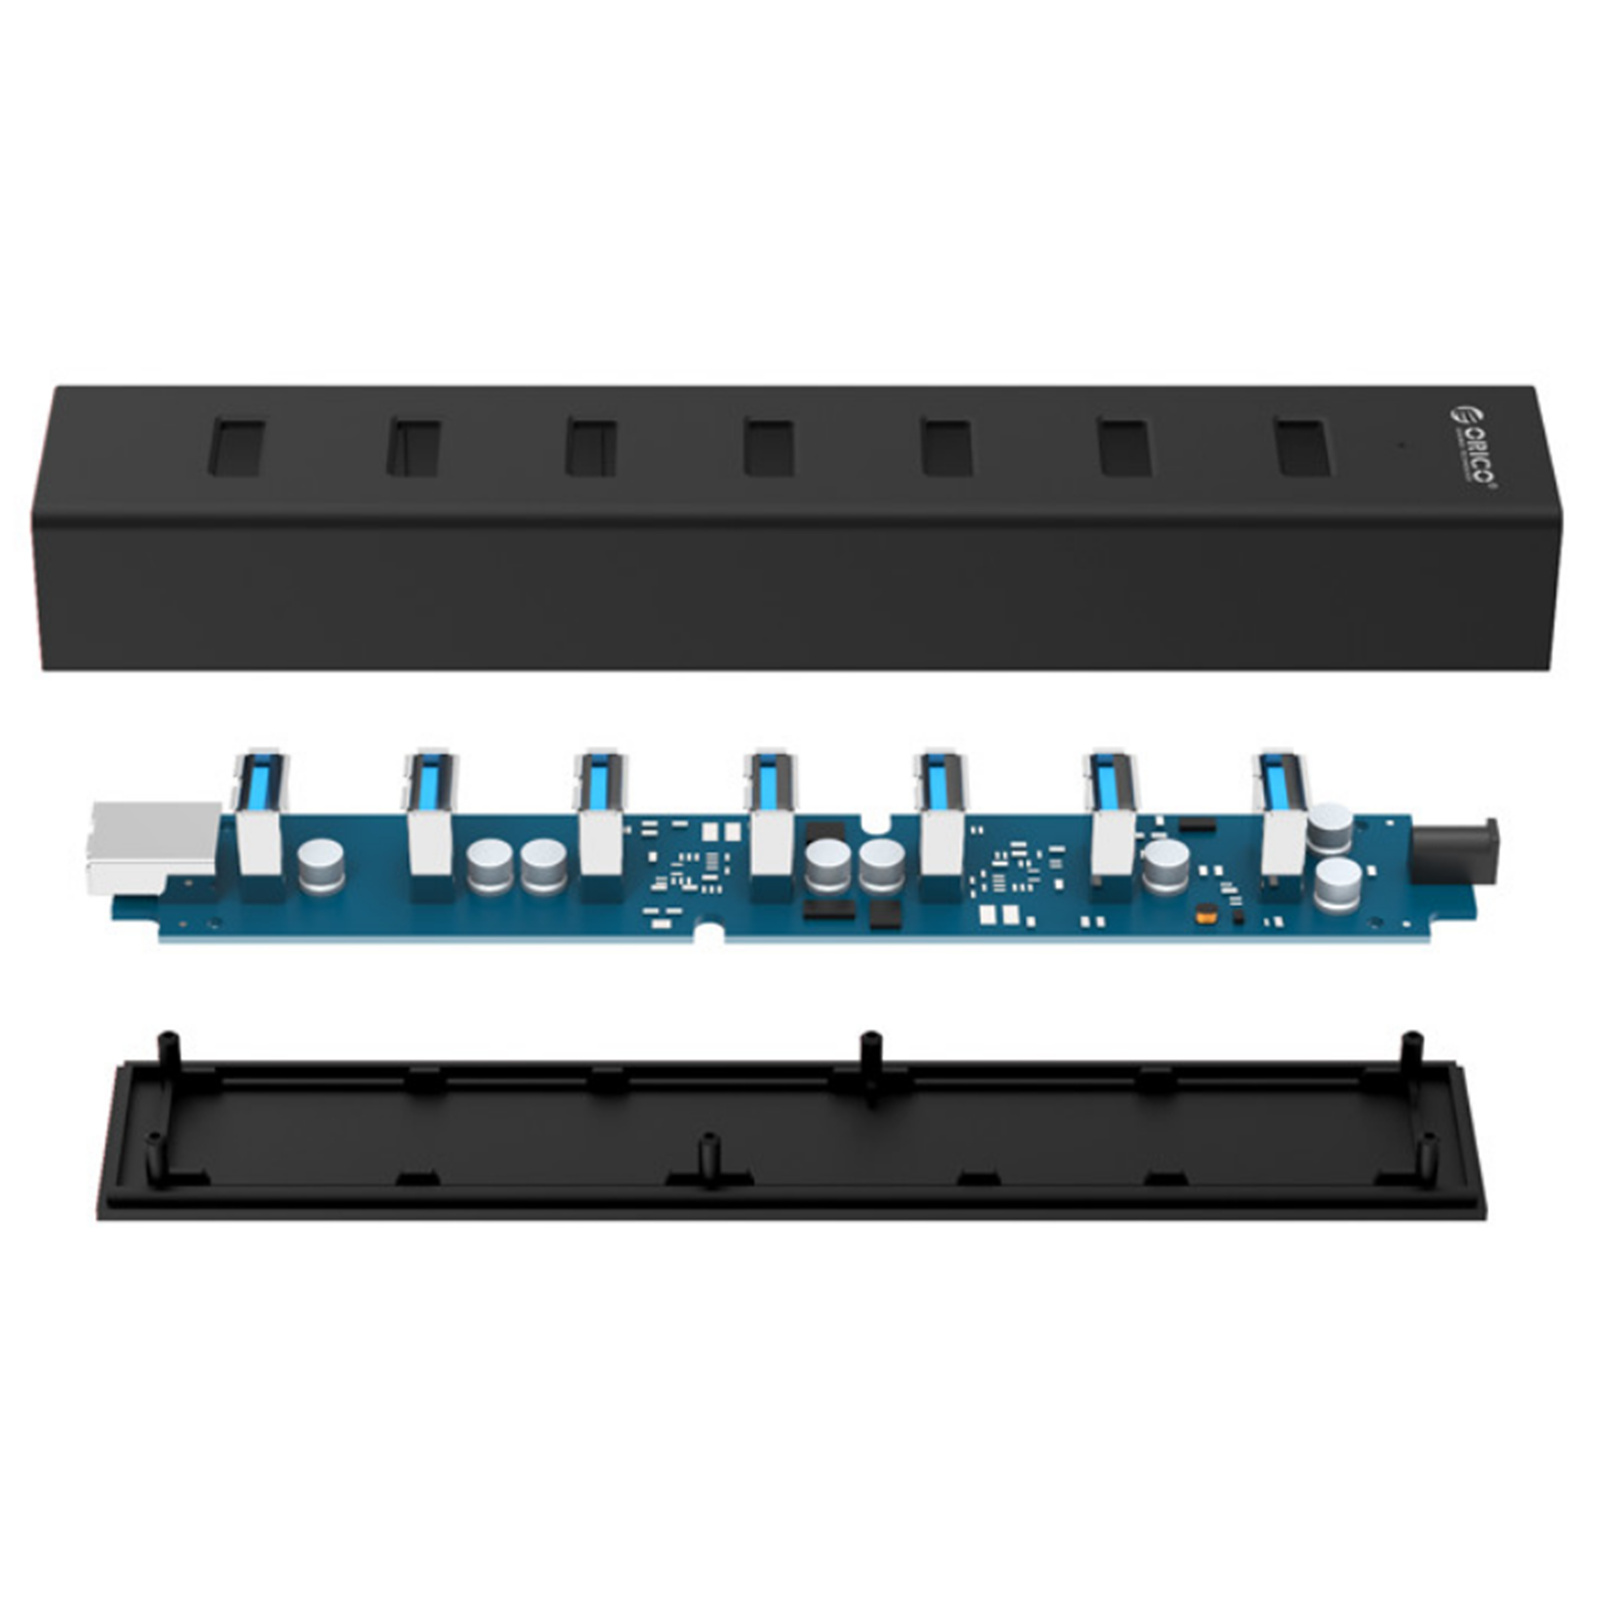 Buy the Orico 7 Port USB 3.0 HUB with Data Cable and Power Adapter  (H7013-U3)... ( H7013-U3-BK ) online - PBTech.com